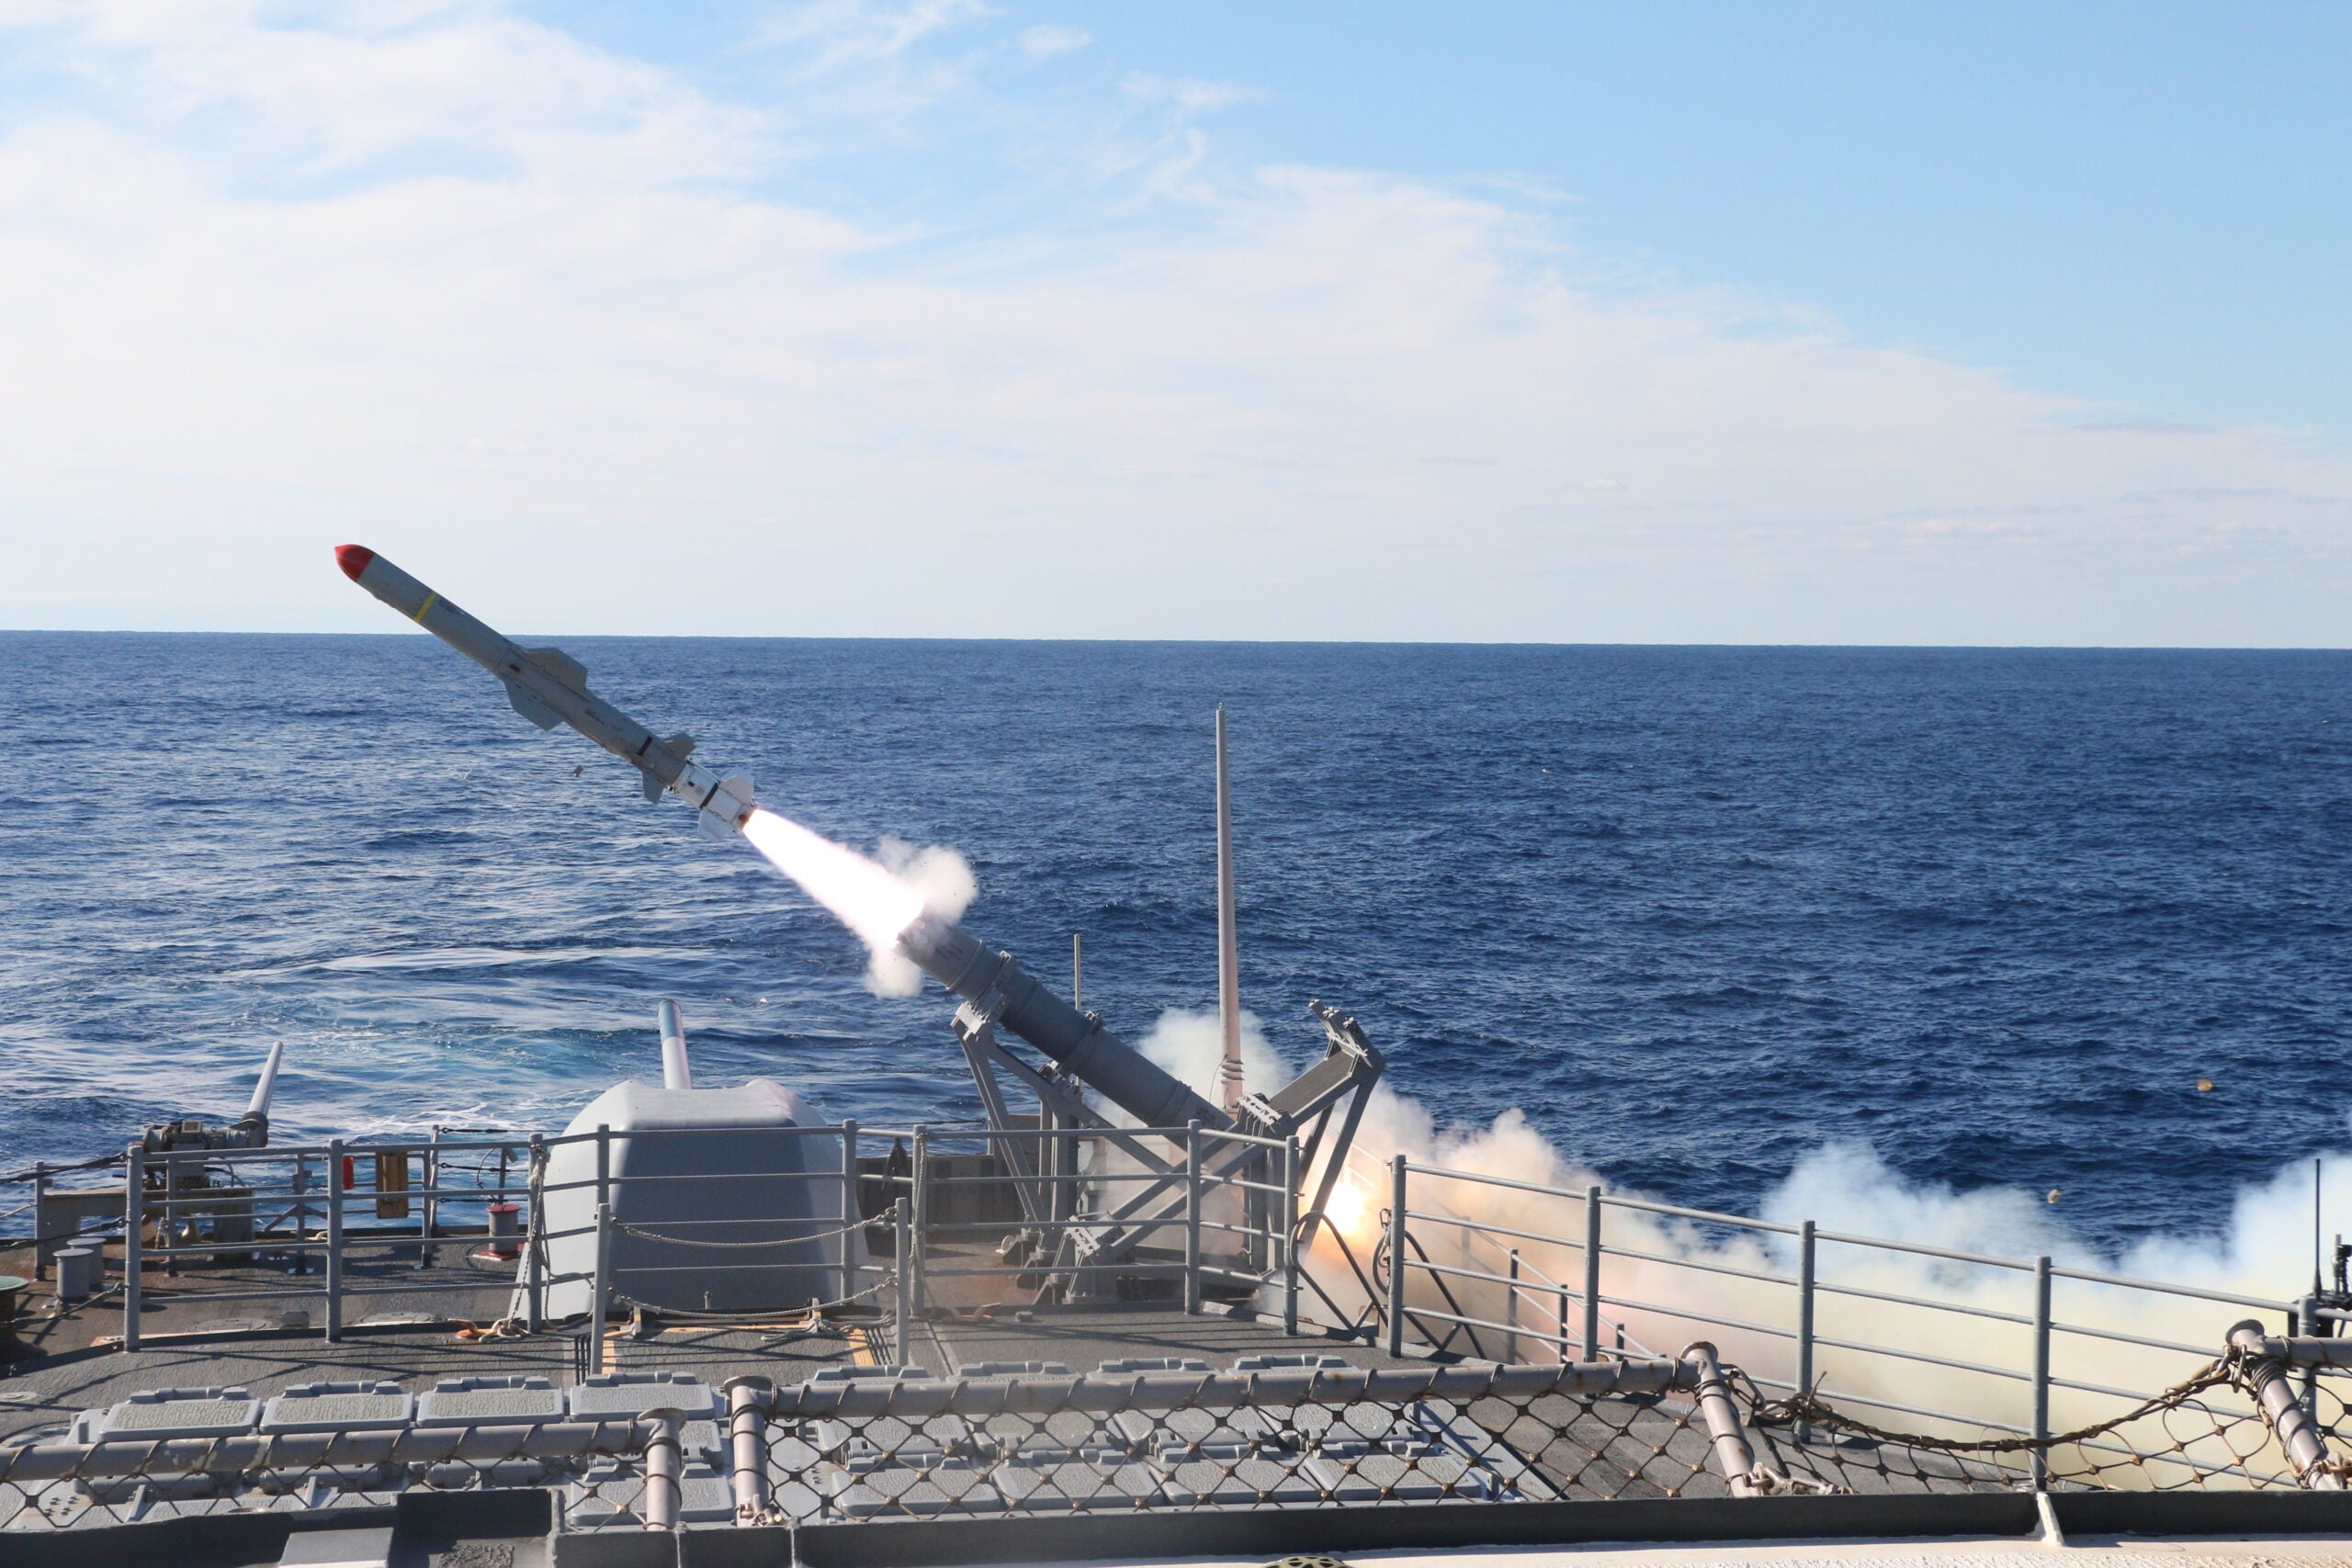 The Ticonderoga-class guided-missile Cruiser USS Monterey (CG 61) launches a harpoon surface-to-surface missile during part of a Live Fire With a Purpose exercise. (U.S. Navy photo by Fire Controlman (Aegis) Third Class Raymond Castillo / Released)